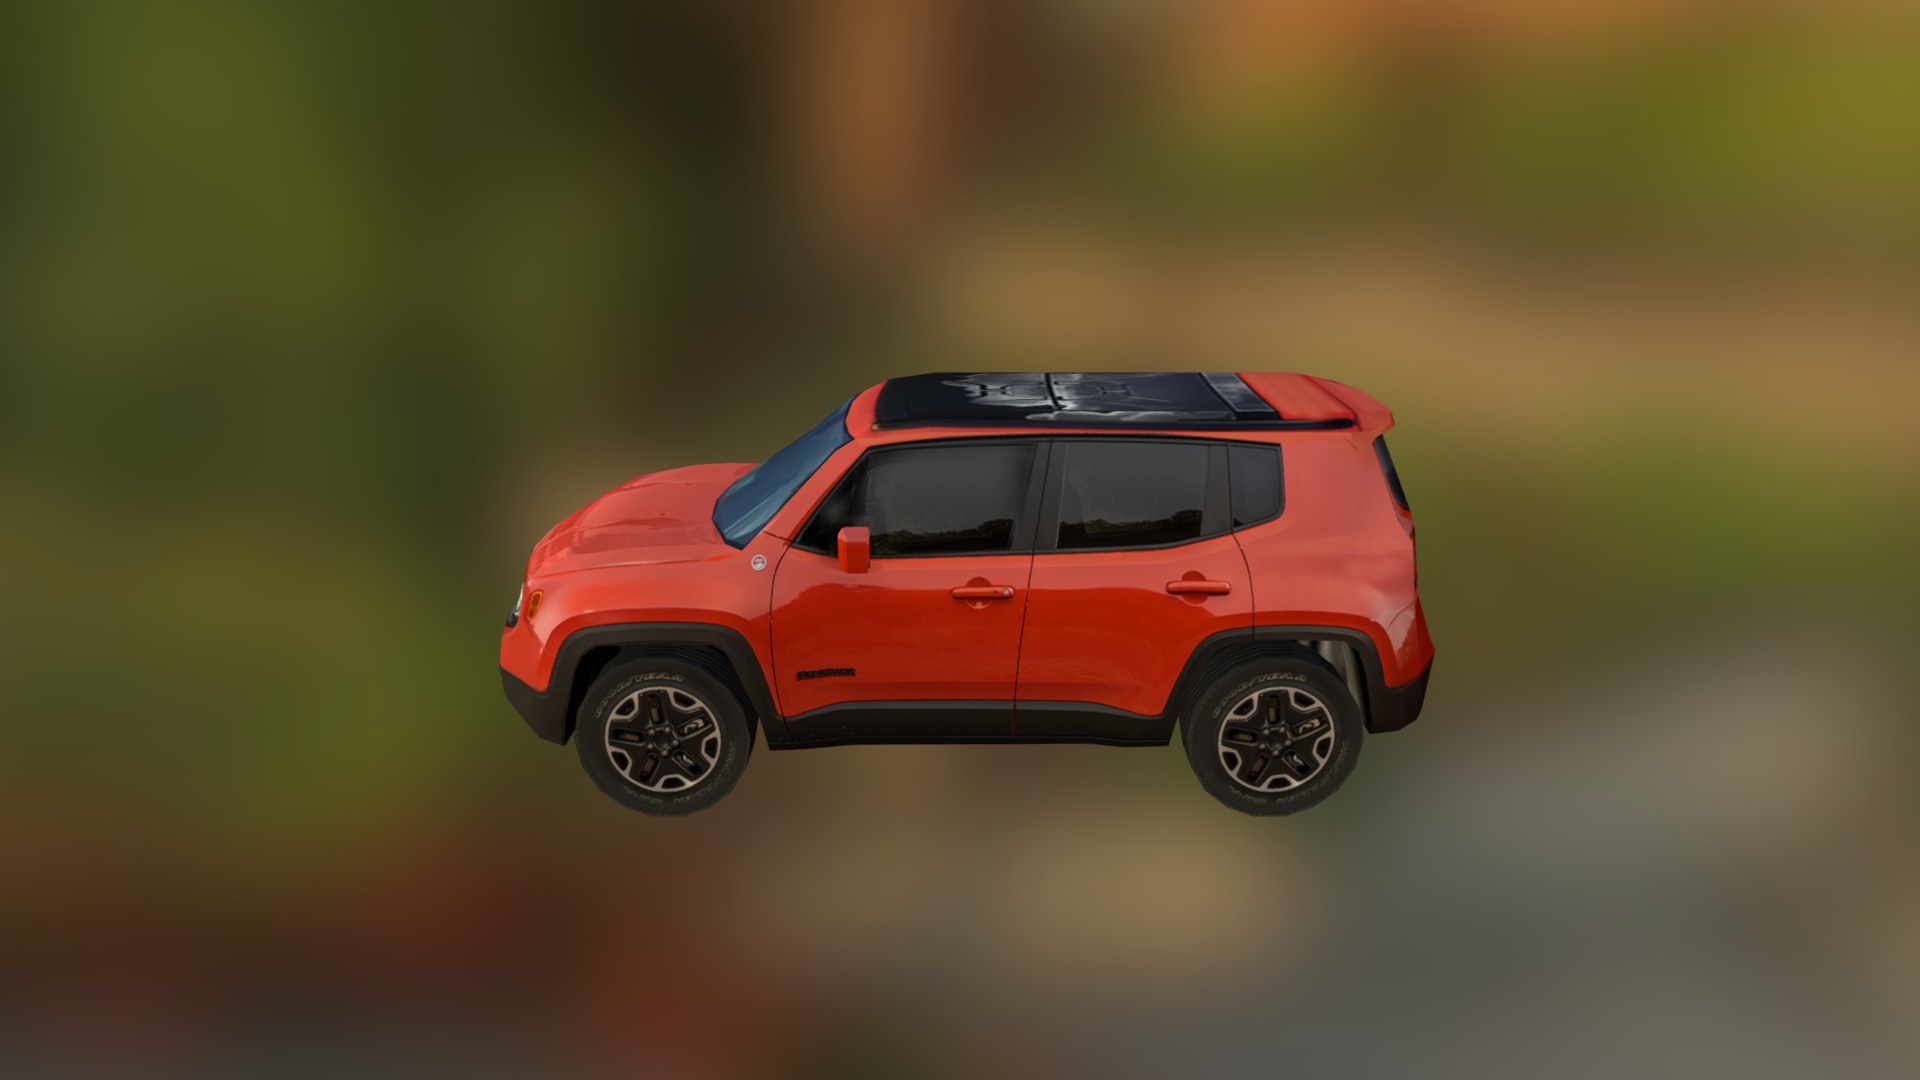 3D model Jeep Renegade 2016 4X4 - This is a 3D model of the Jeep Renegade 2016 4X4. The 3D model is about a red car with a blue roof.